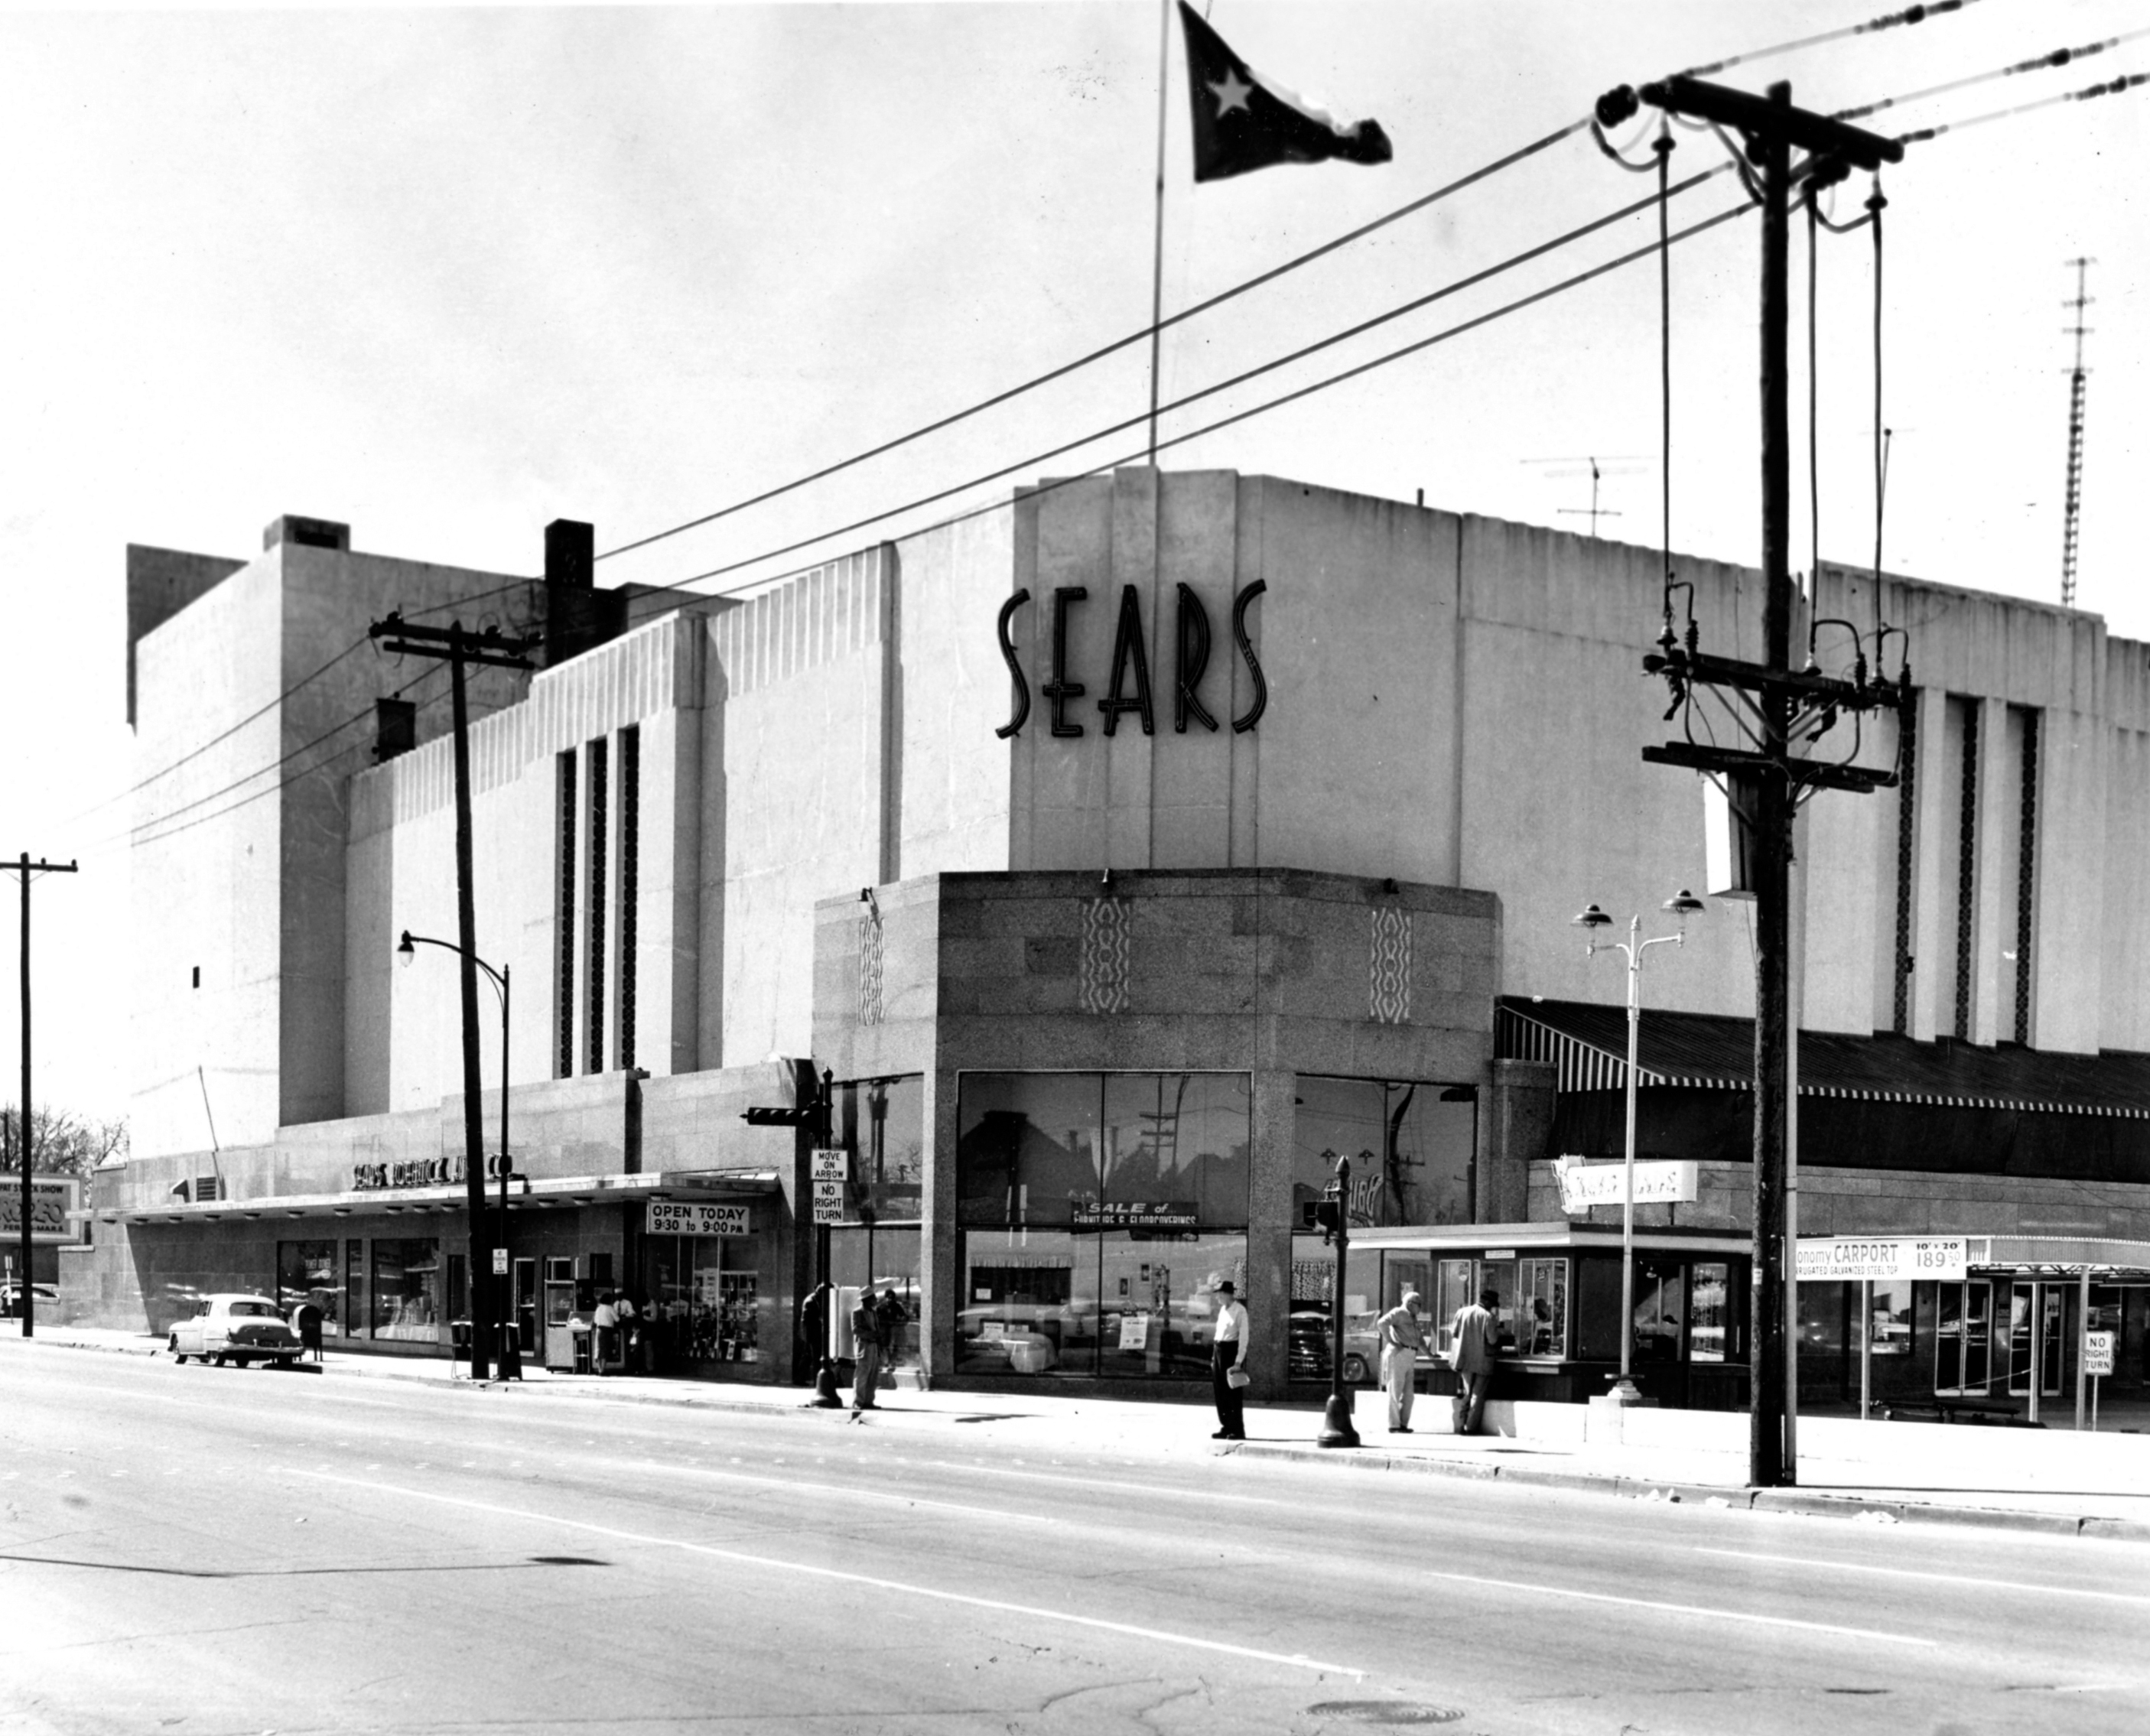 Sears files for Chapter 11 amid plunging sales, massive debt